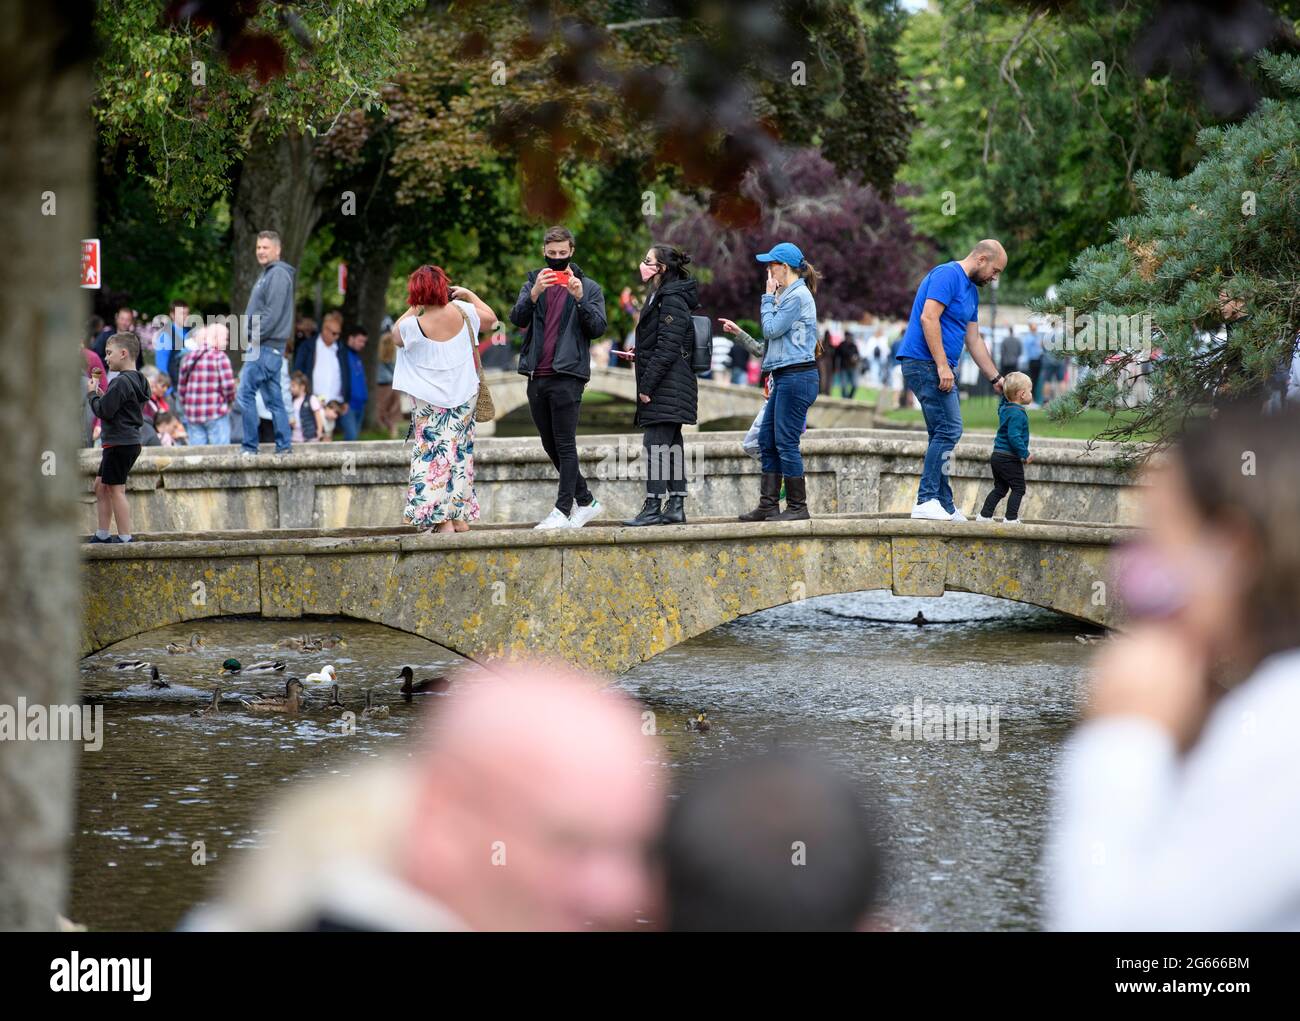 Scenes in the Cotswold village of Bourton-on-the-Water which experienced unprecedented visitor numbers during the Coronavirus pandemic, Aug 2020 Stock Photo